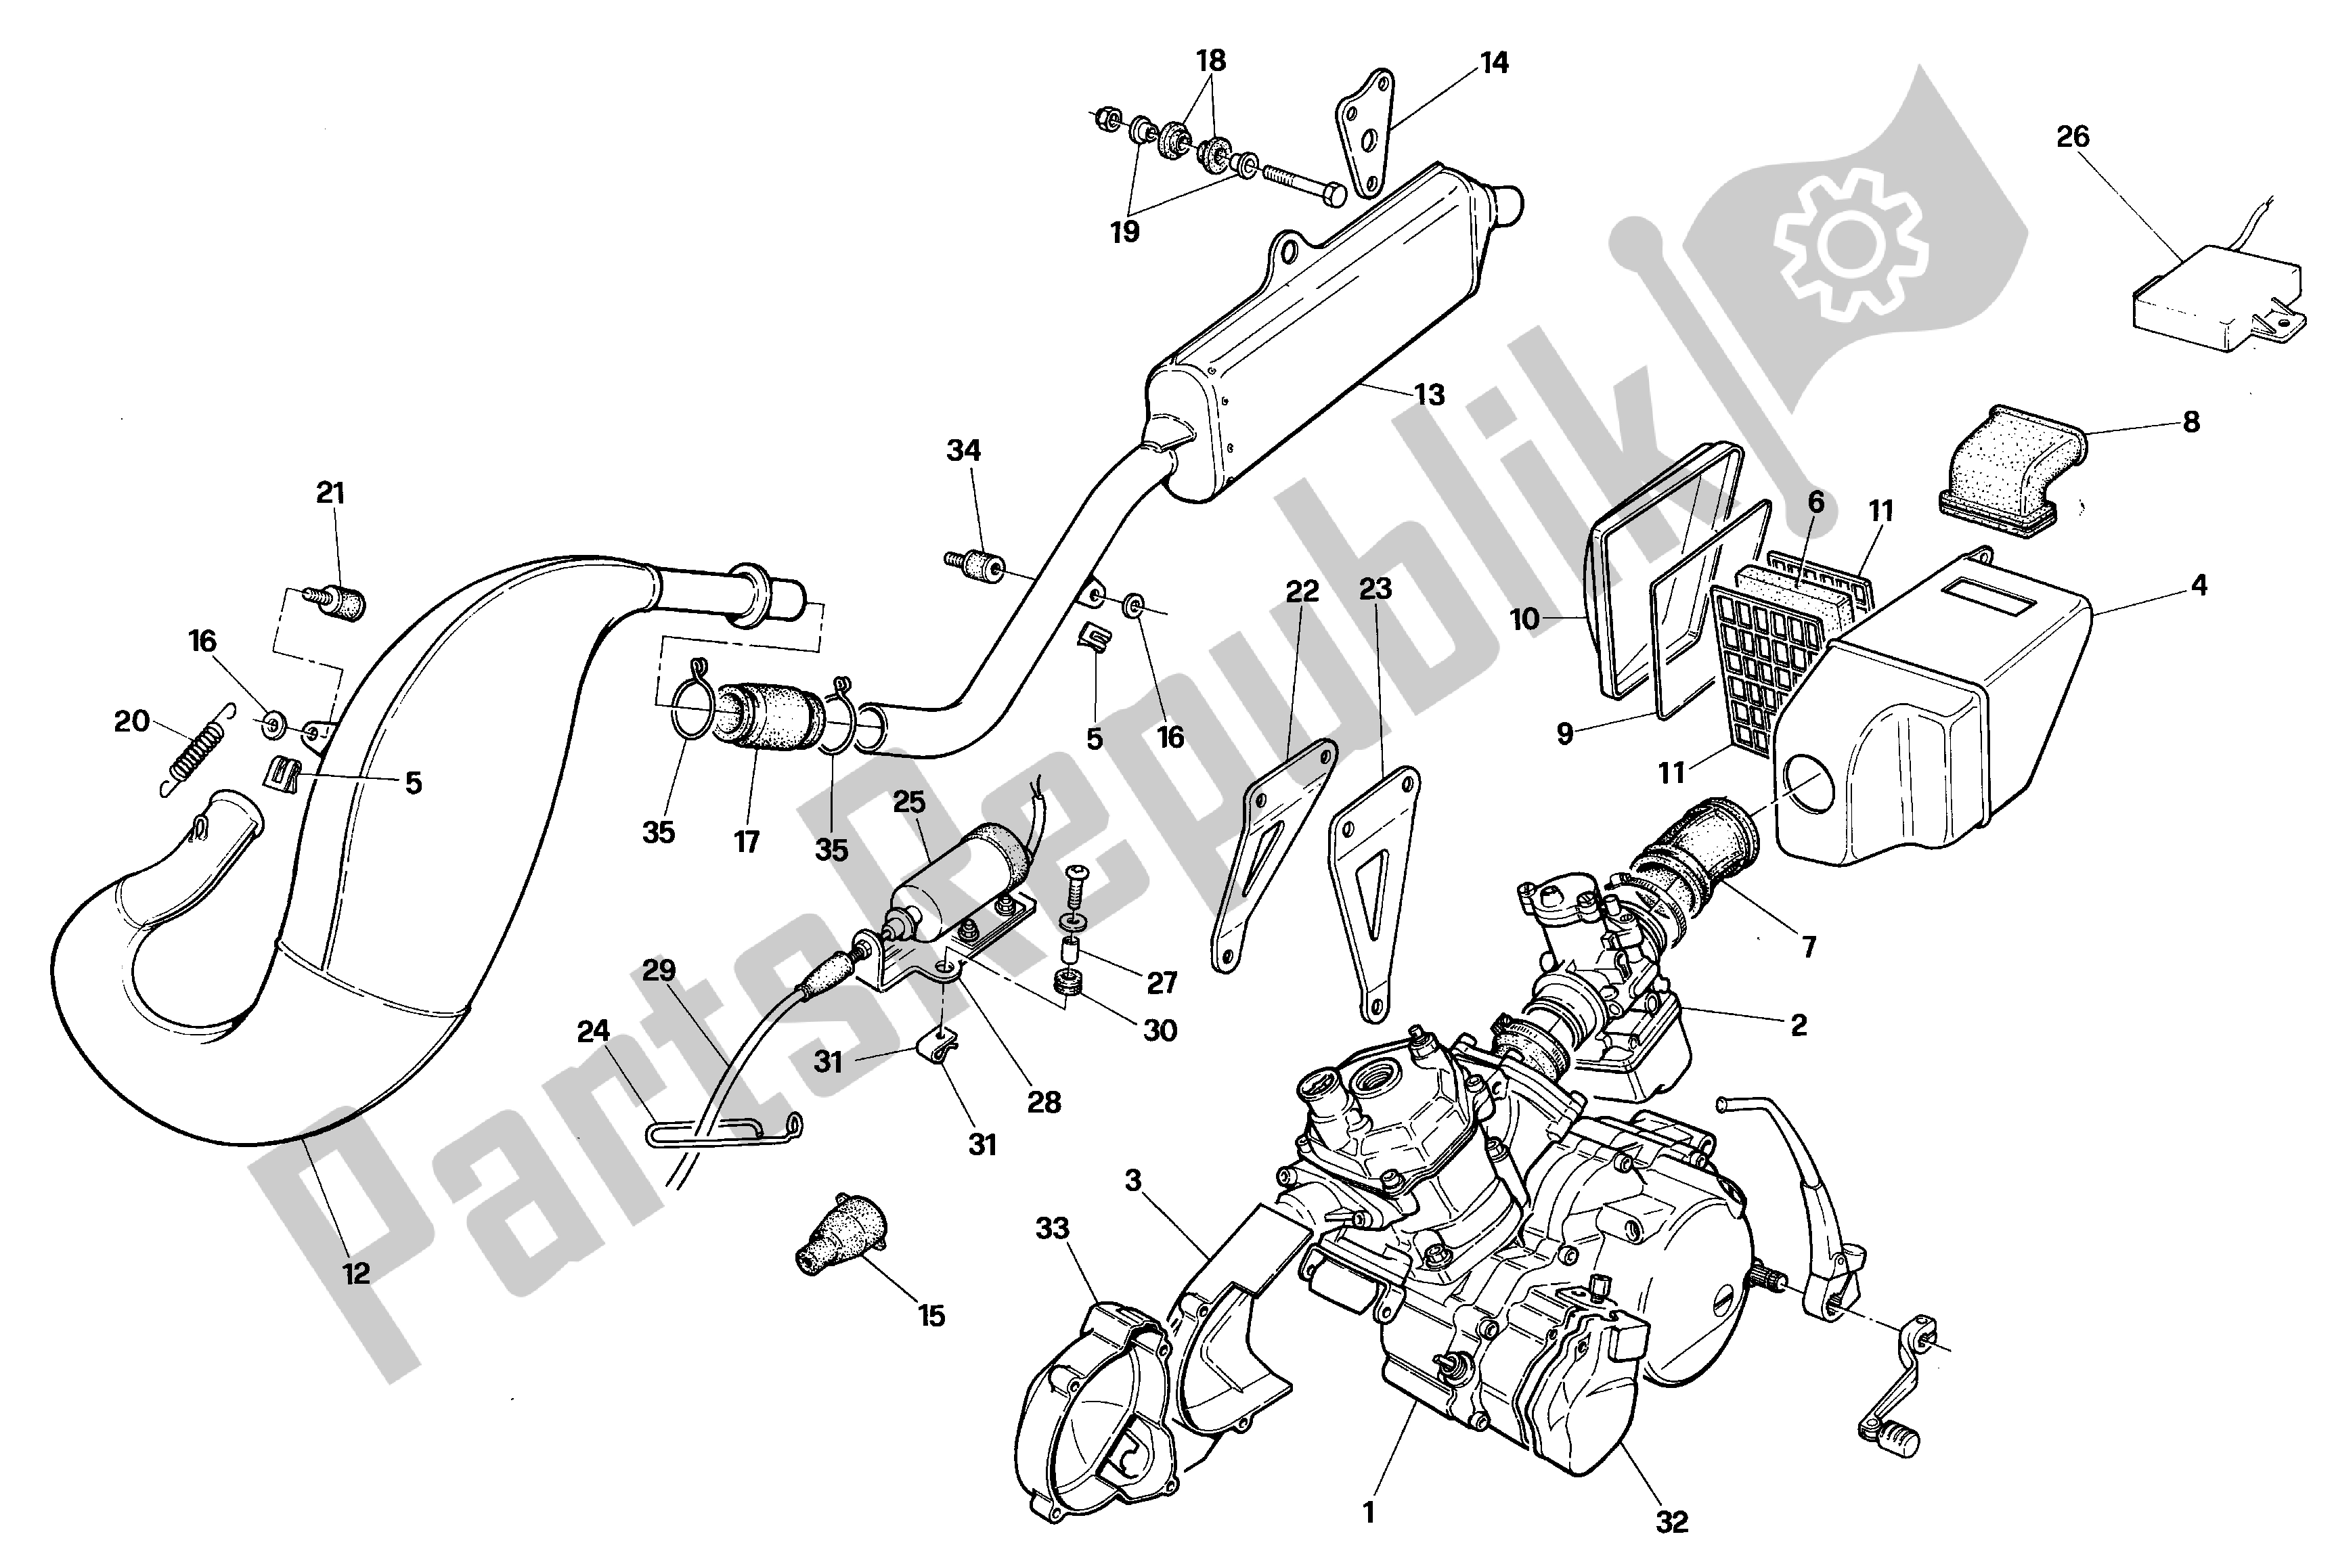 All parts for the Exhaust Assembly of the Aprilia RX 125 1989 - 1993